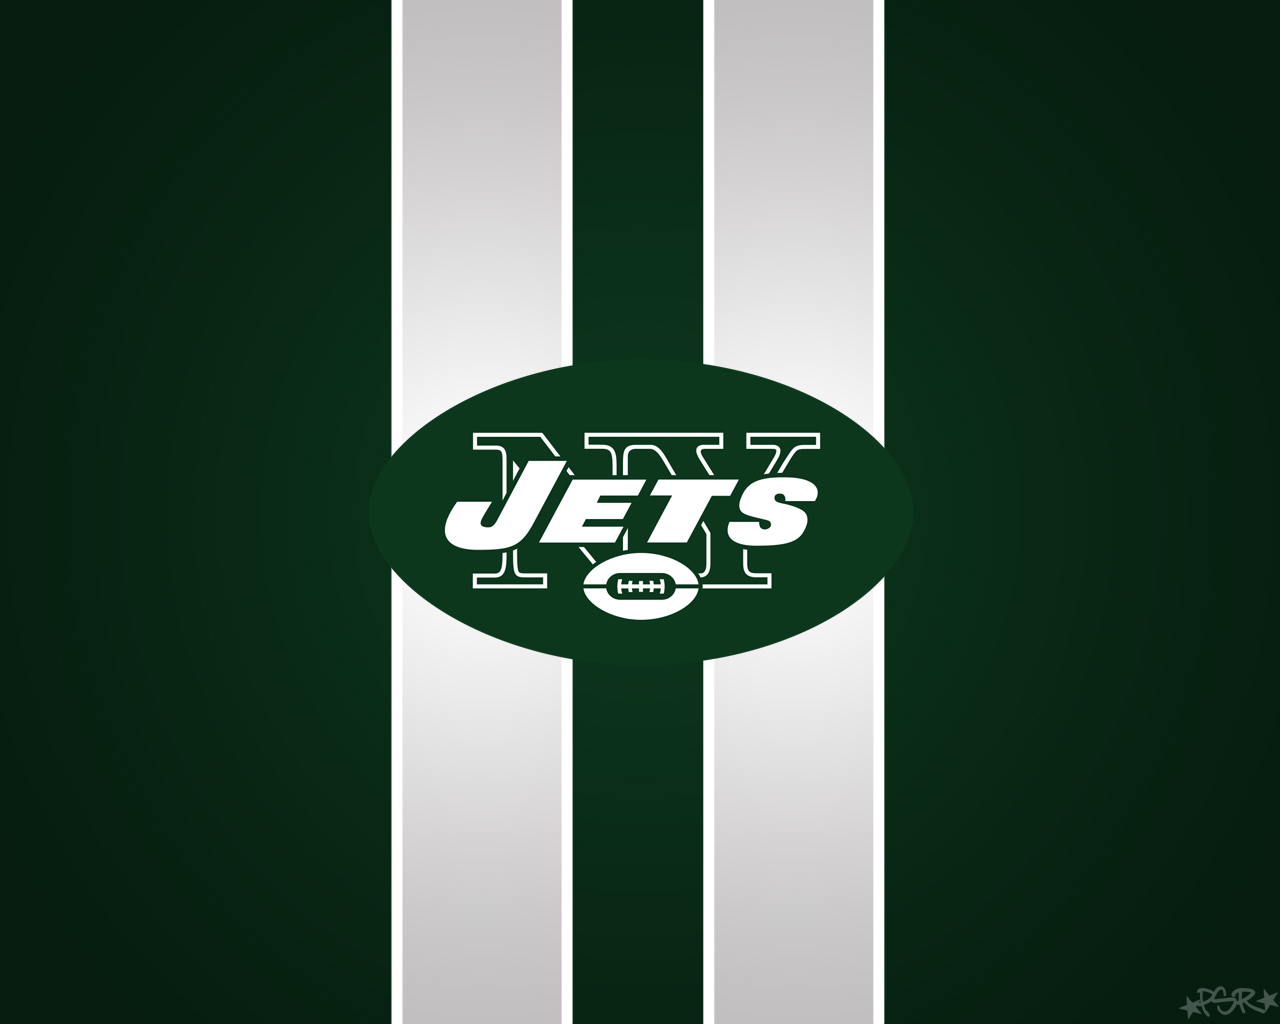 New York Jets Wallpapers  Top 30 Best New York Jets Wallpapers Download